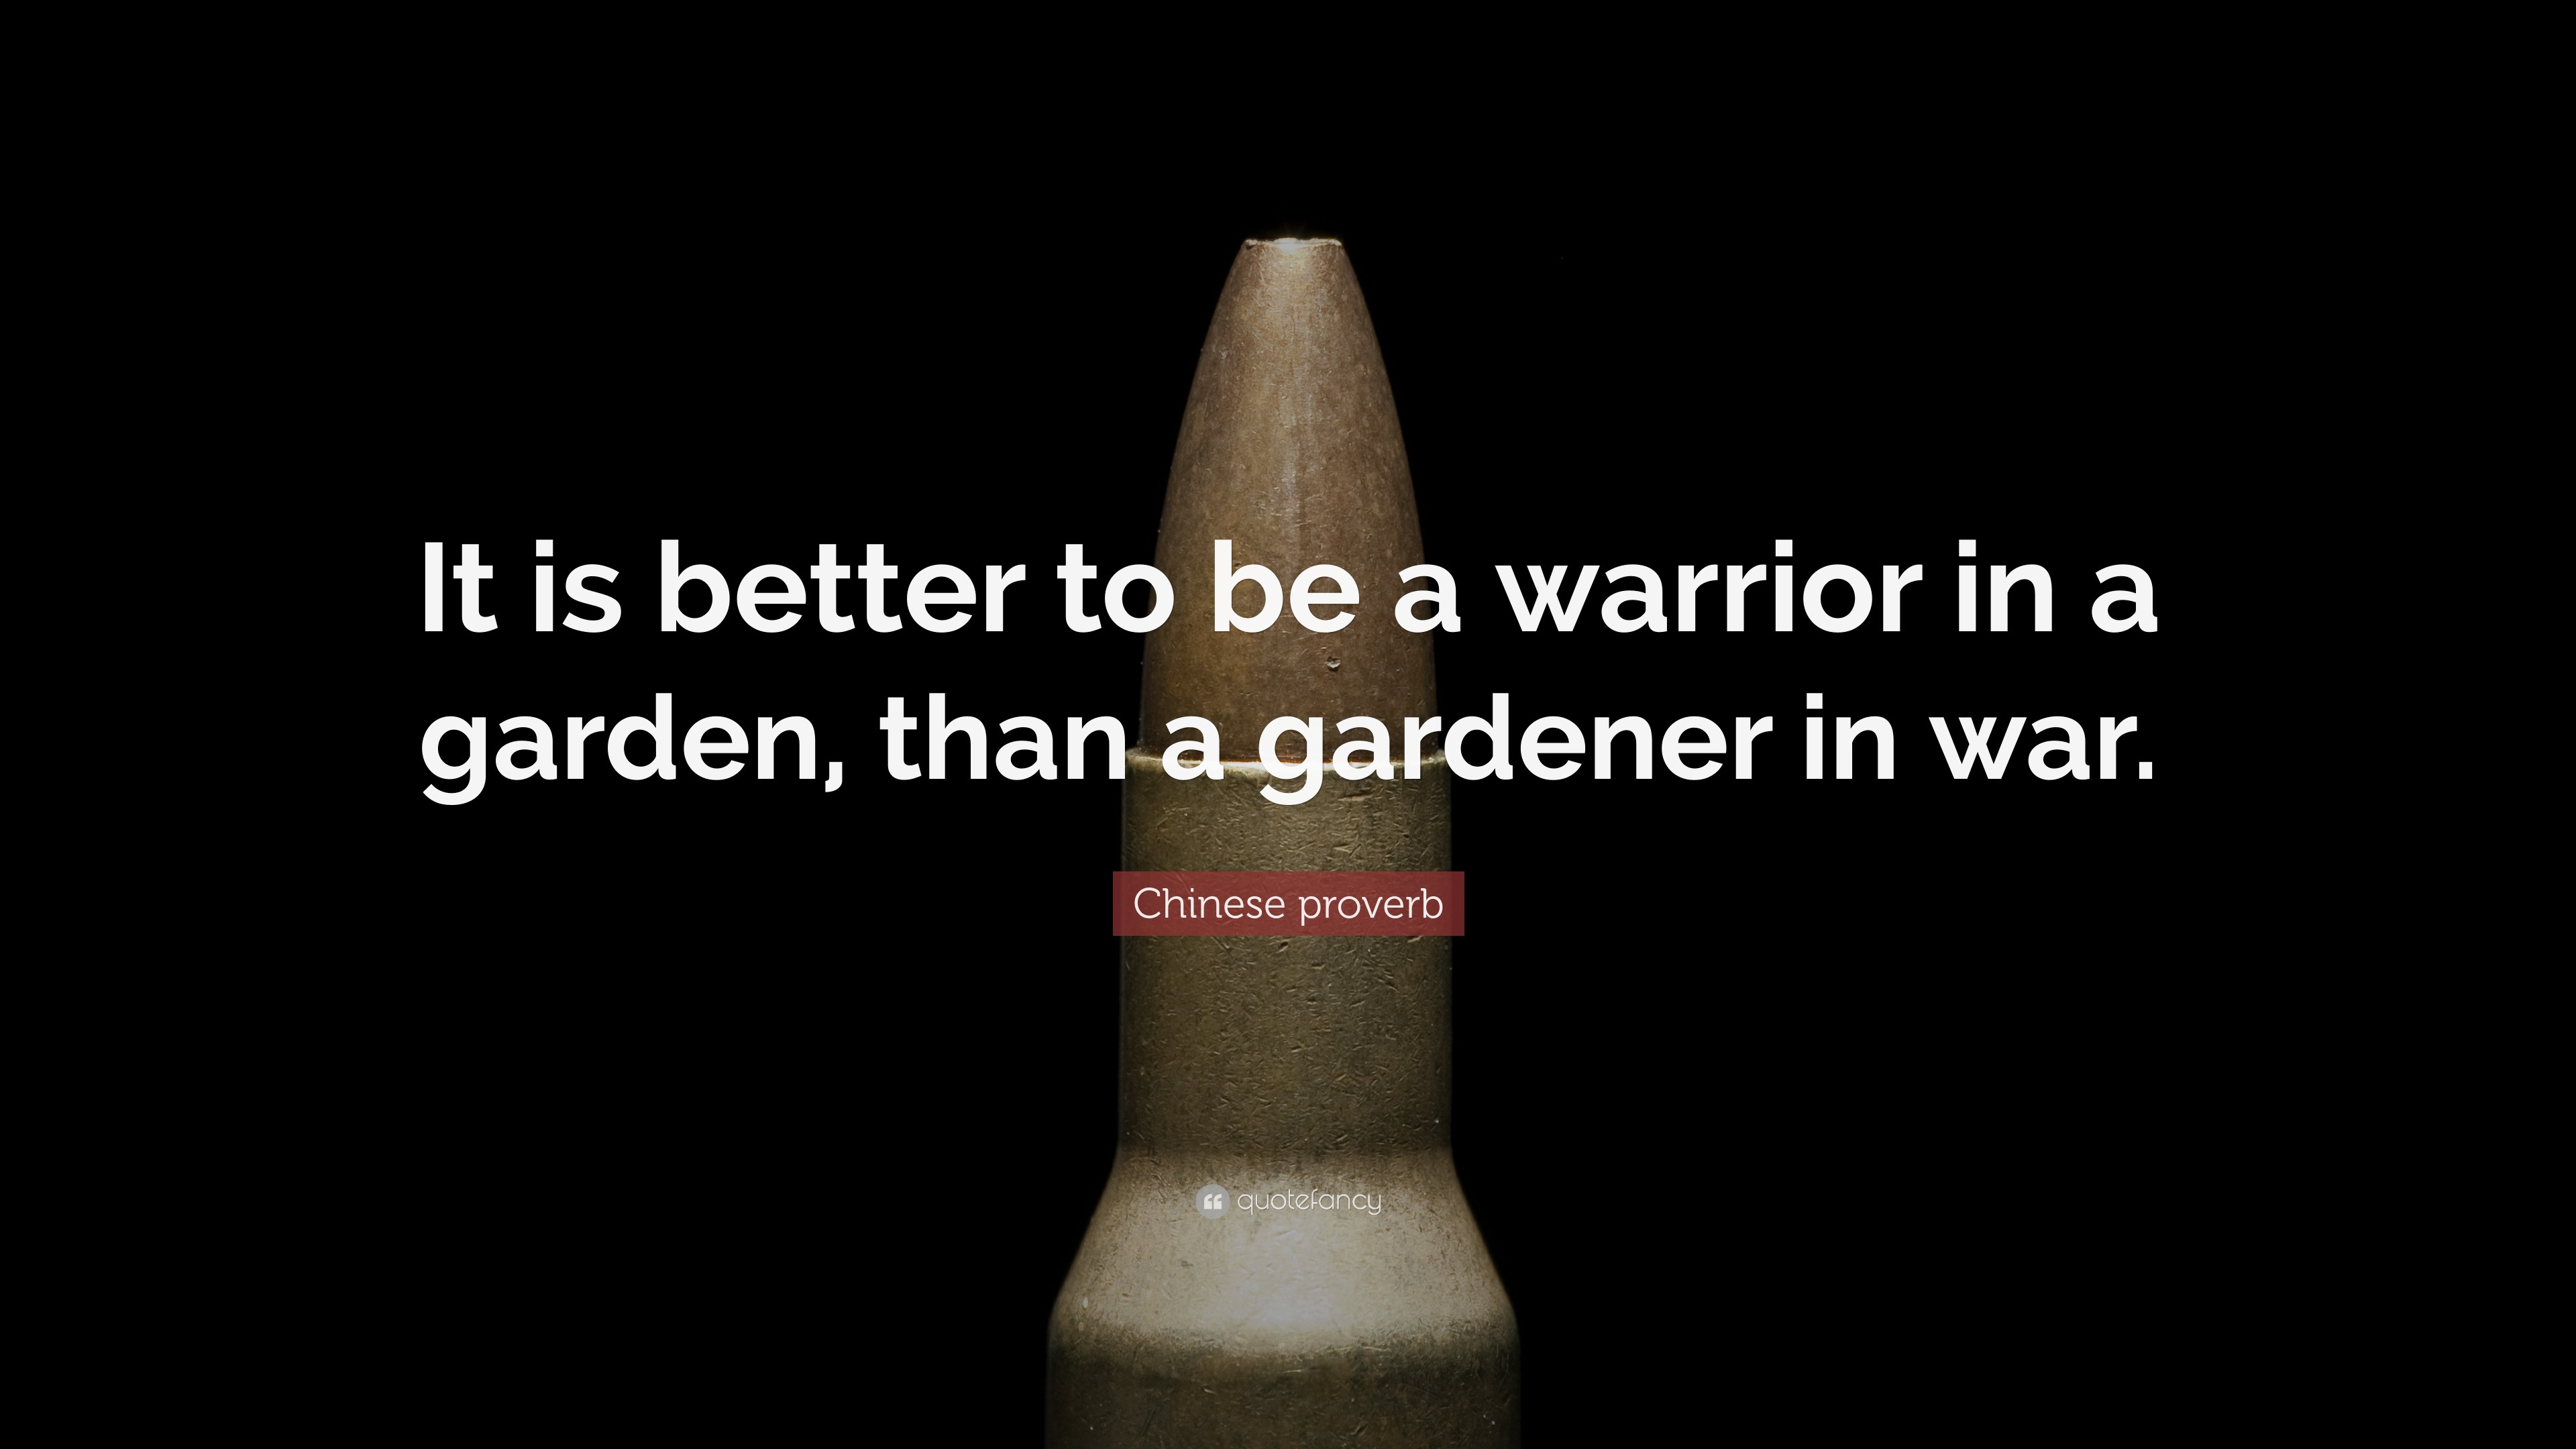 Chinese proverb Quote: "It is better to be a warrior in a garden, than a gardener in war." (32 ...